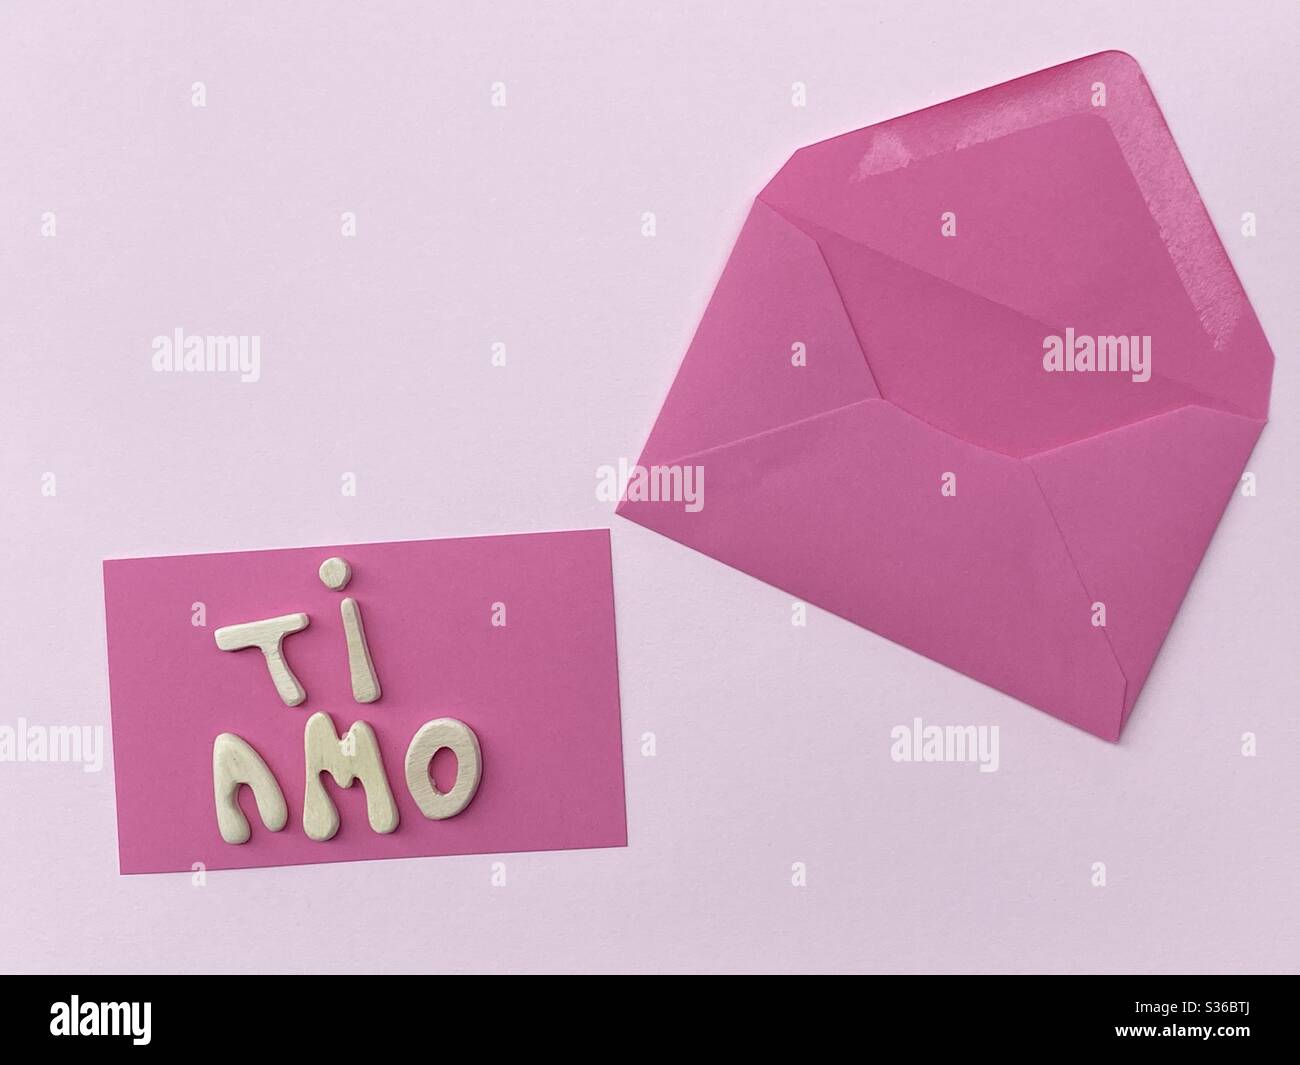 Ti amo, I love you composed with handmade wooden letters over pink card Stock Photo